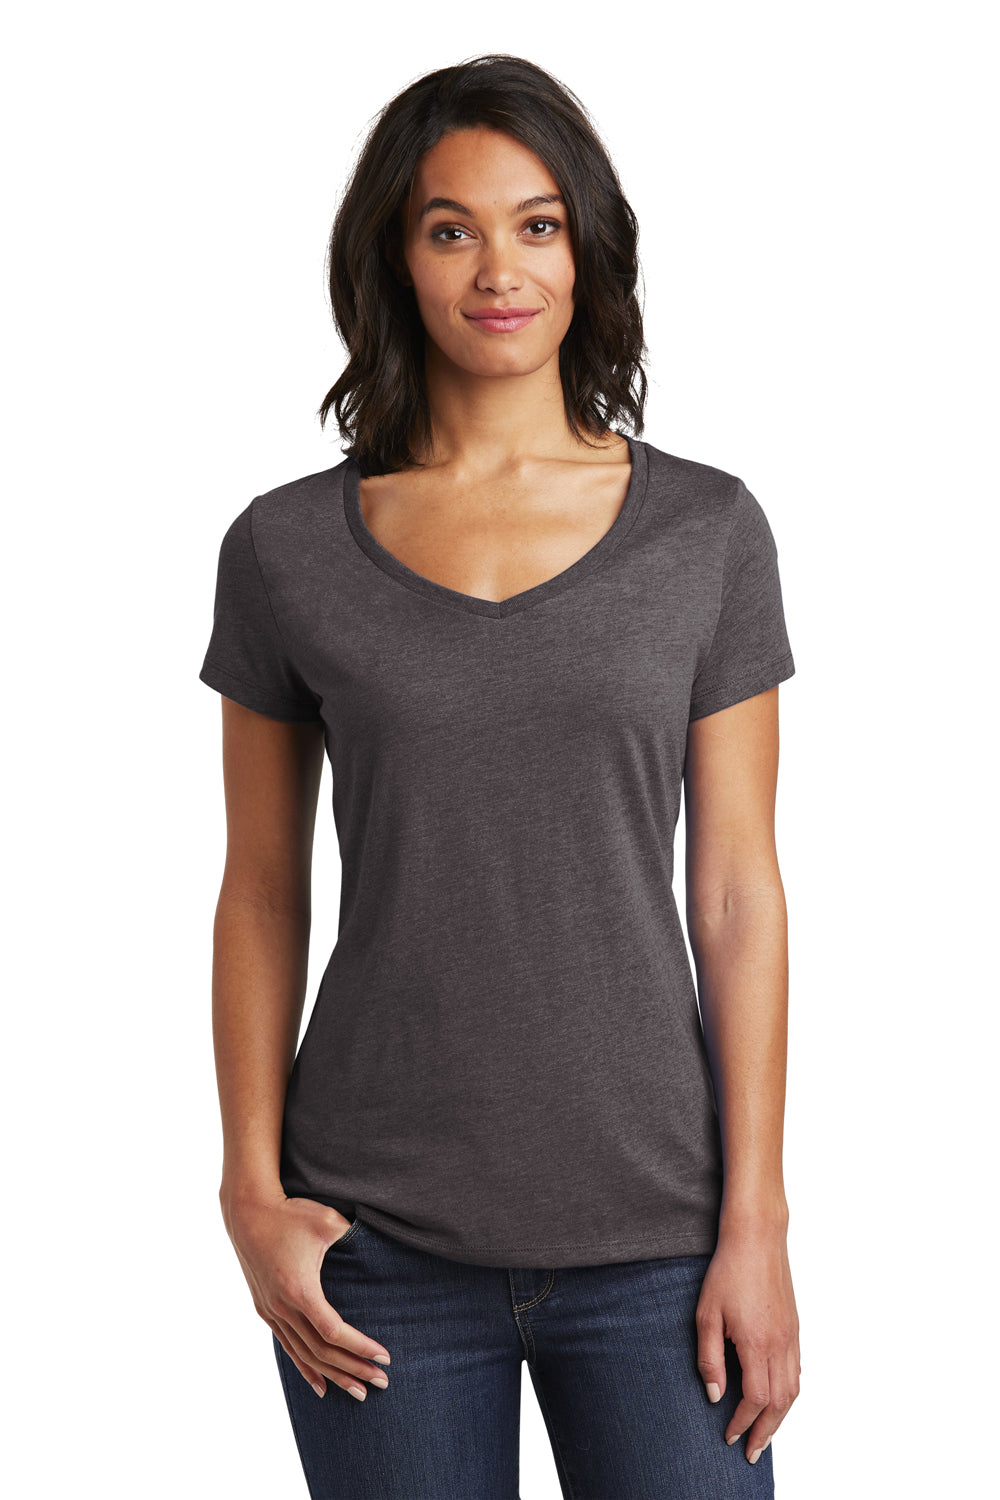 District DT6503 Womens Very Important Short Sleeve V-Neck T-Shirt Heather Charcoal Grey Front